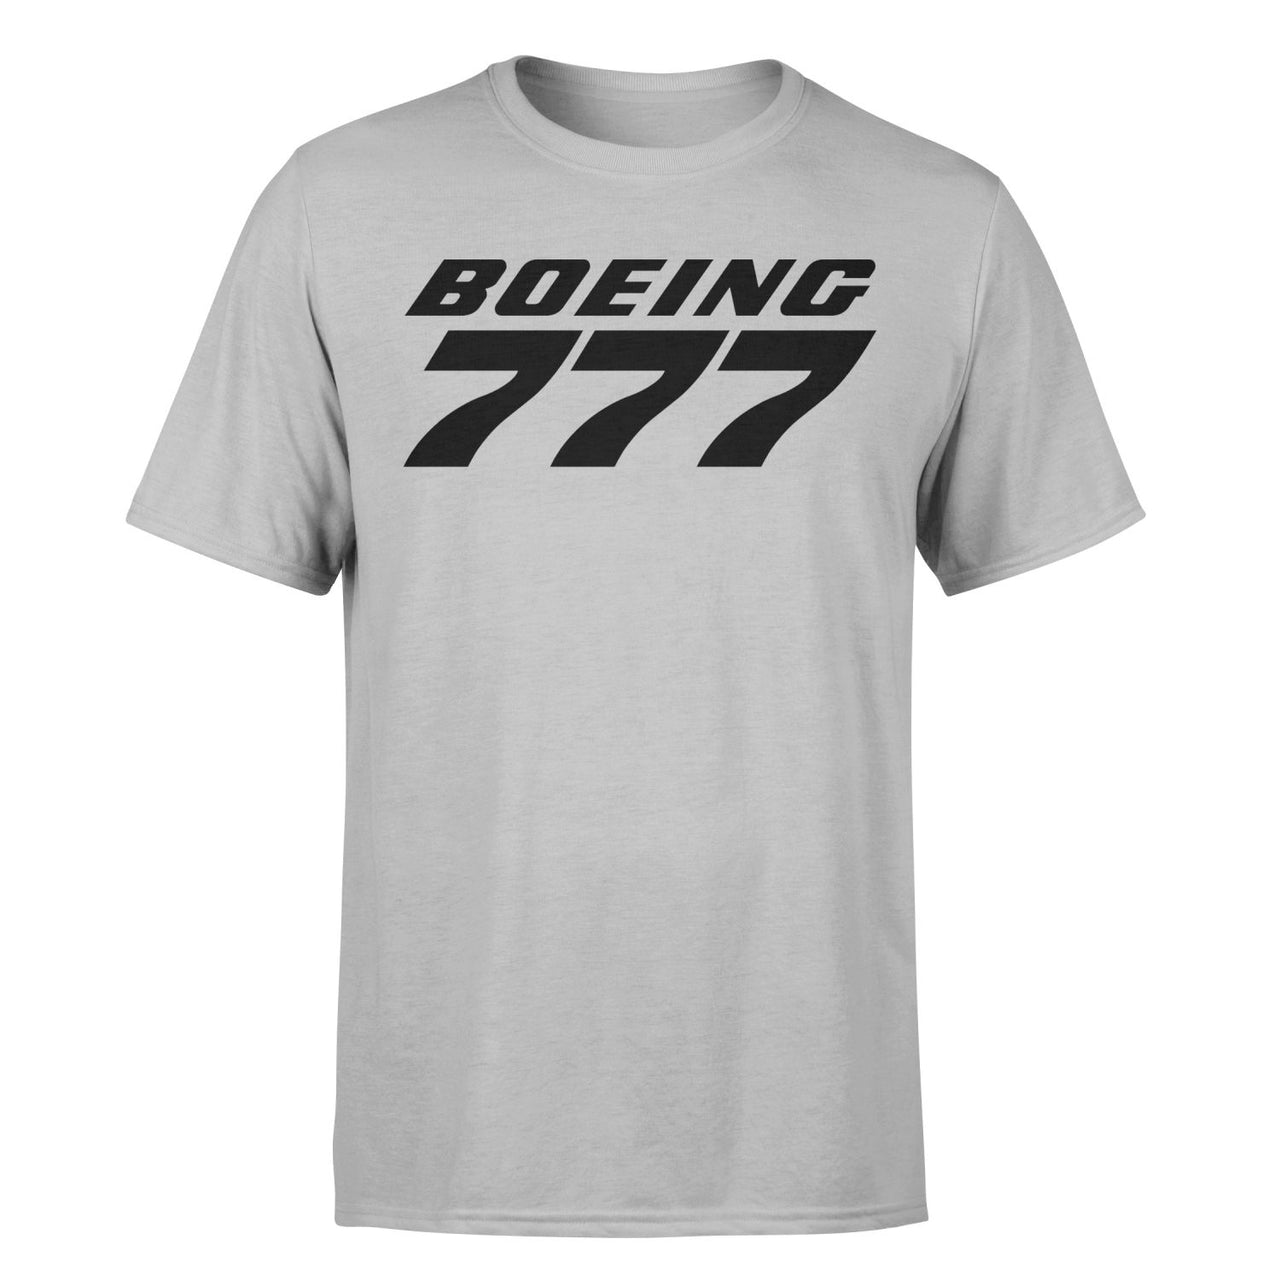 Boeing 777 & Text Designed T-Shirts